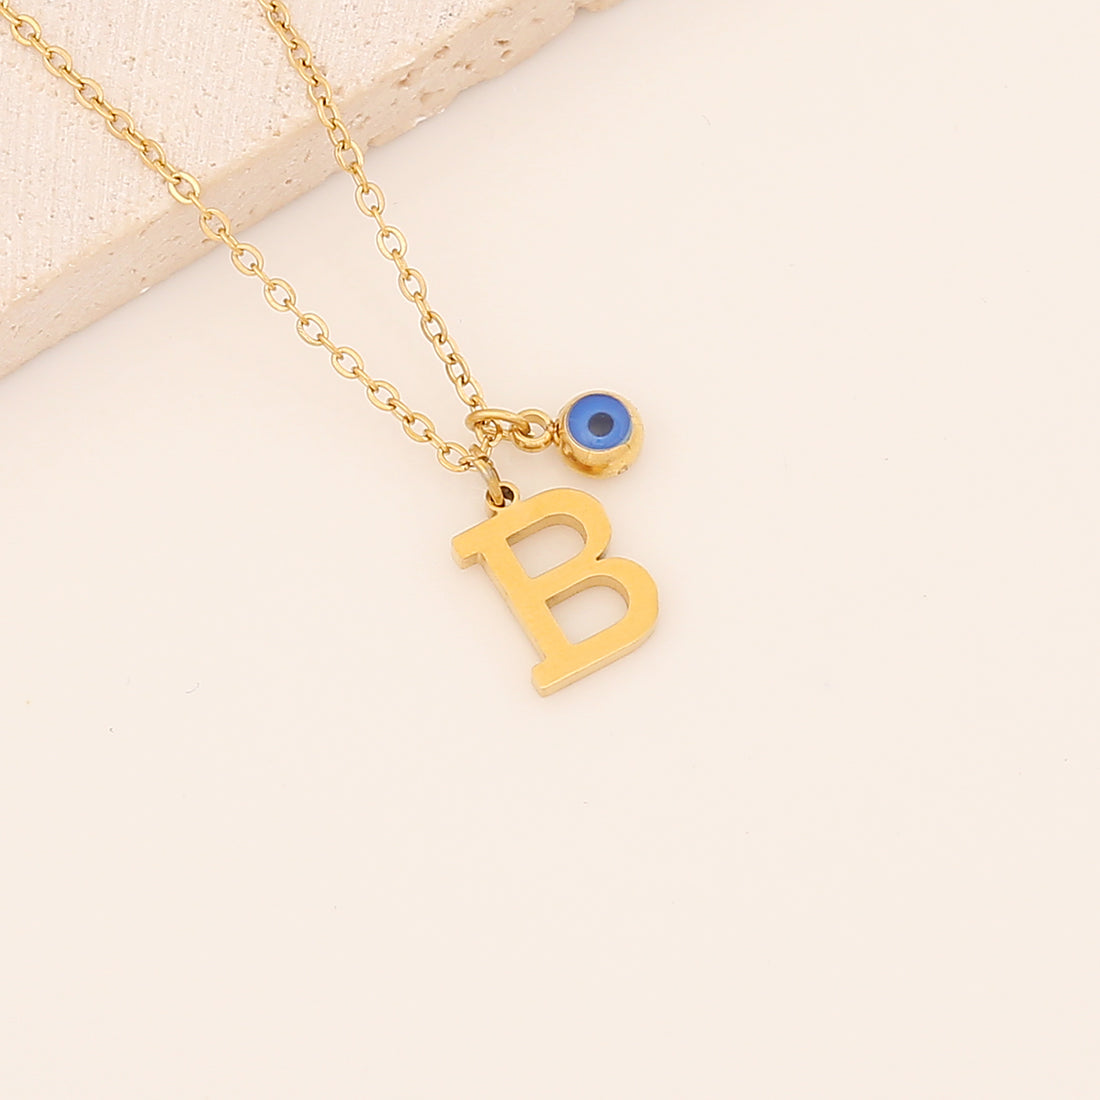 Vintage Style Letter Stainless Steel Plating Pendant Necklace